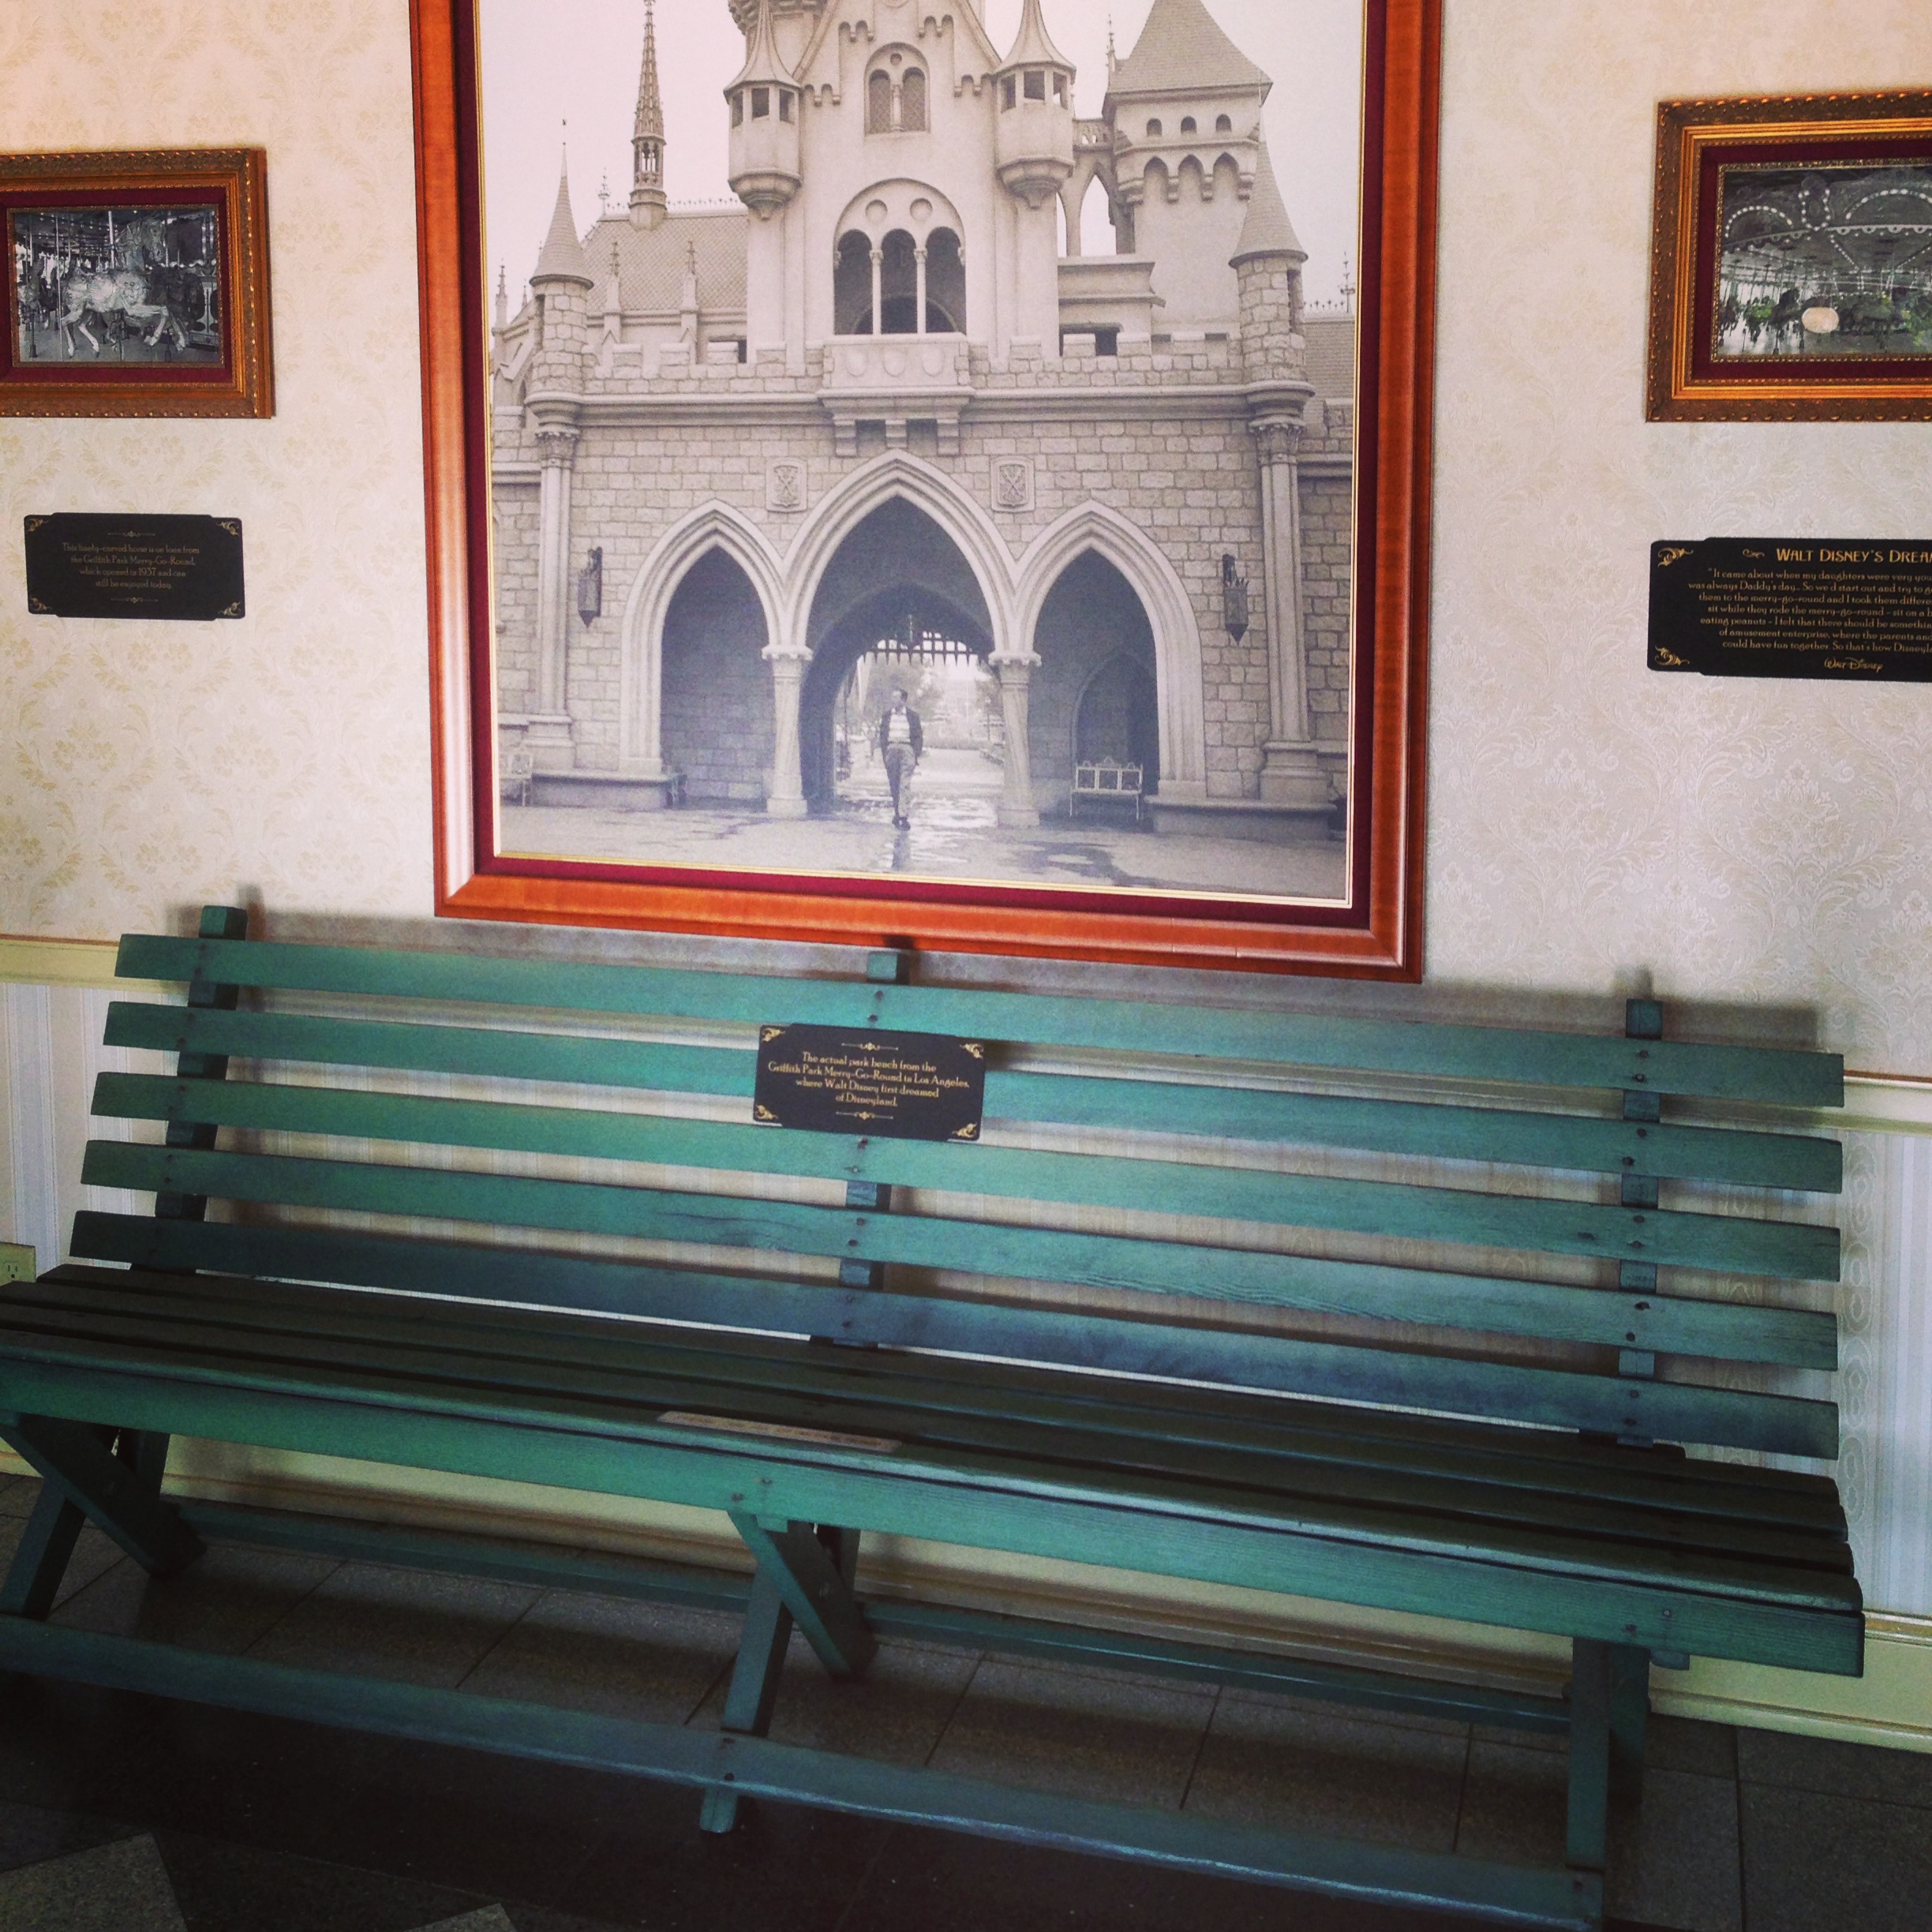 A teal bench sits in front of a picture of the Disney castle.